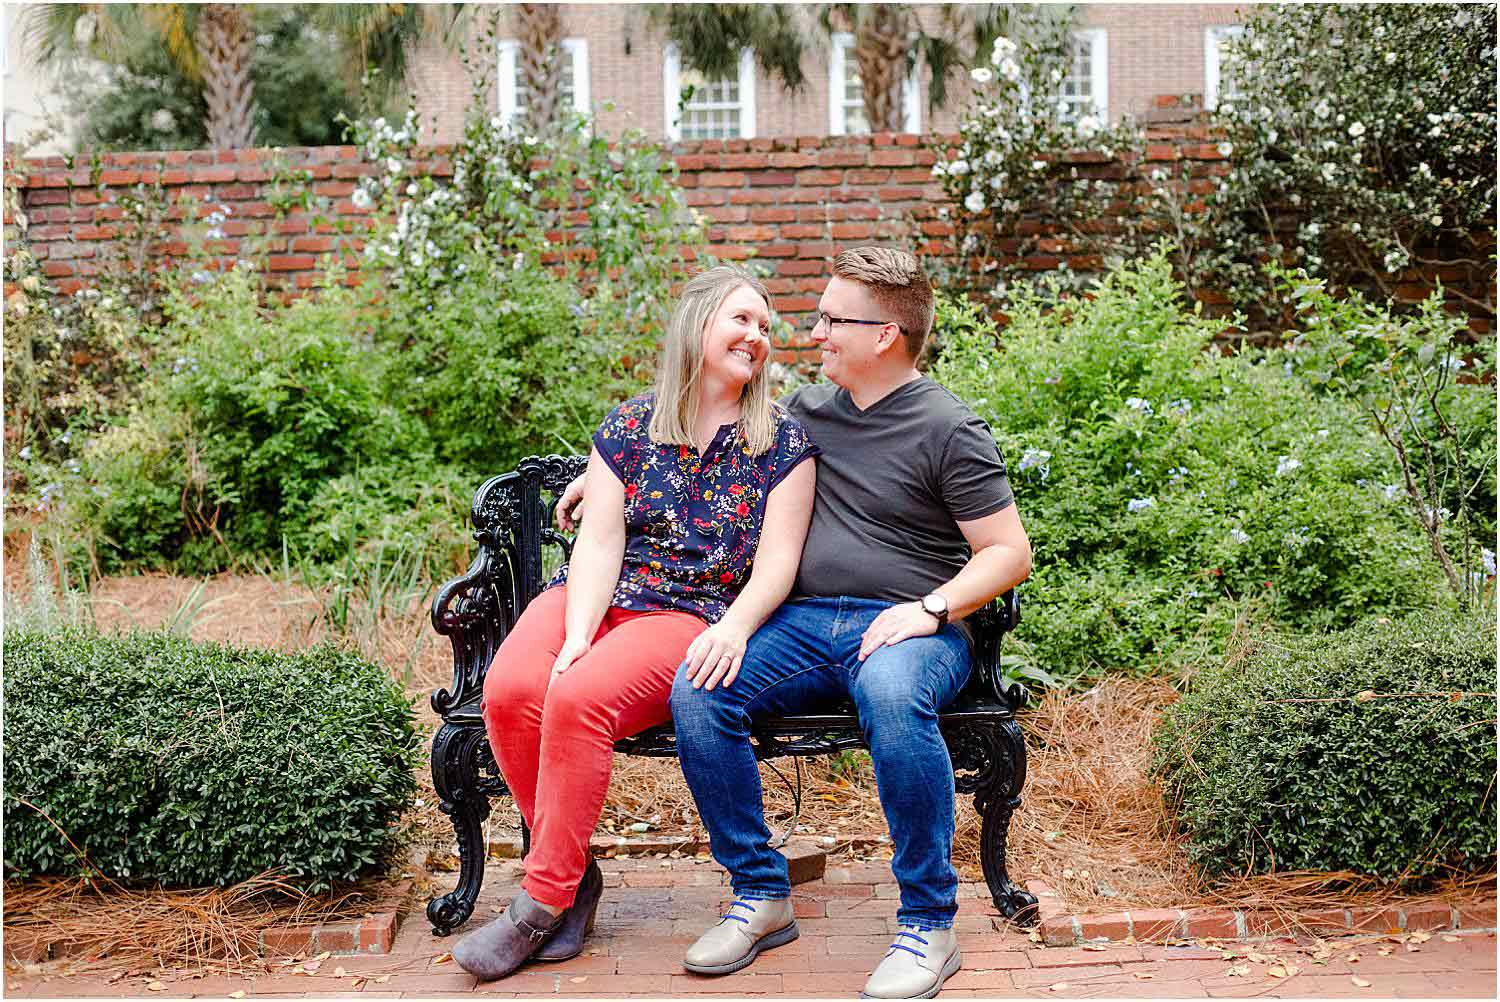 South Carolina engagement photography by Kate Cherry Photography, LLC